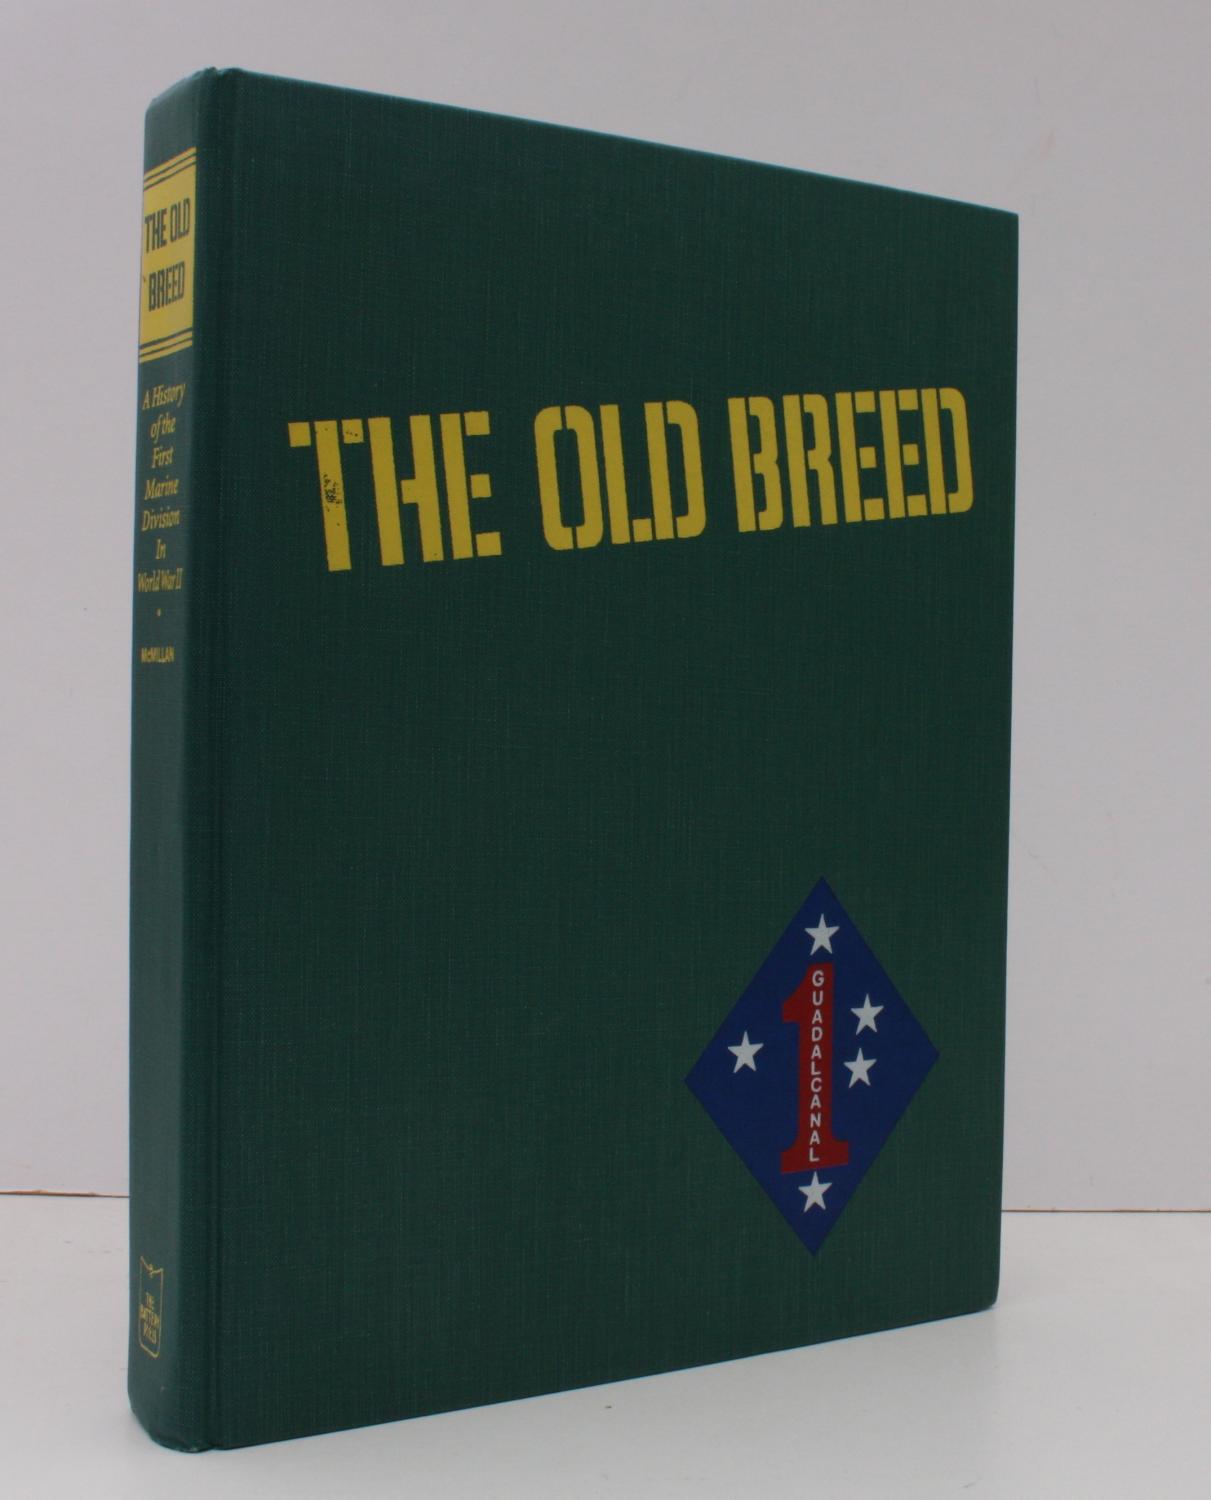 the-old-breed-a-history-of-the-first-marine-division-in-world-war-ii